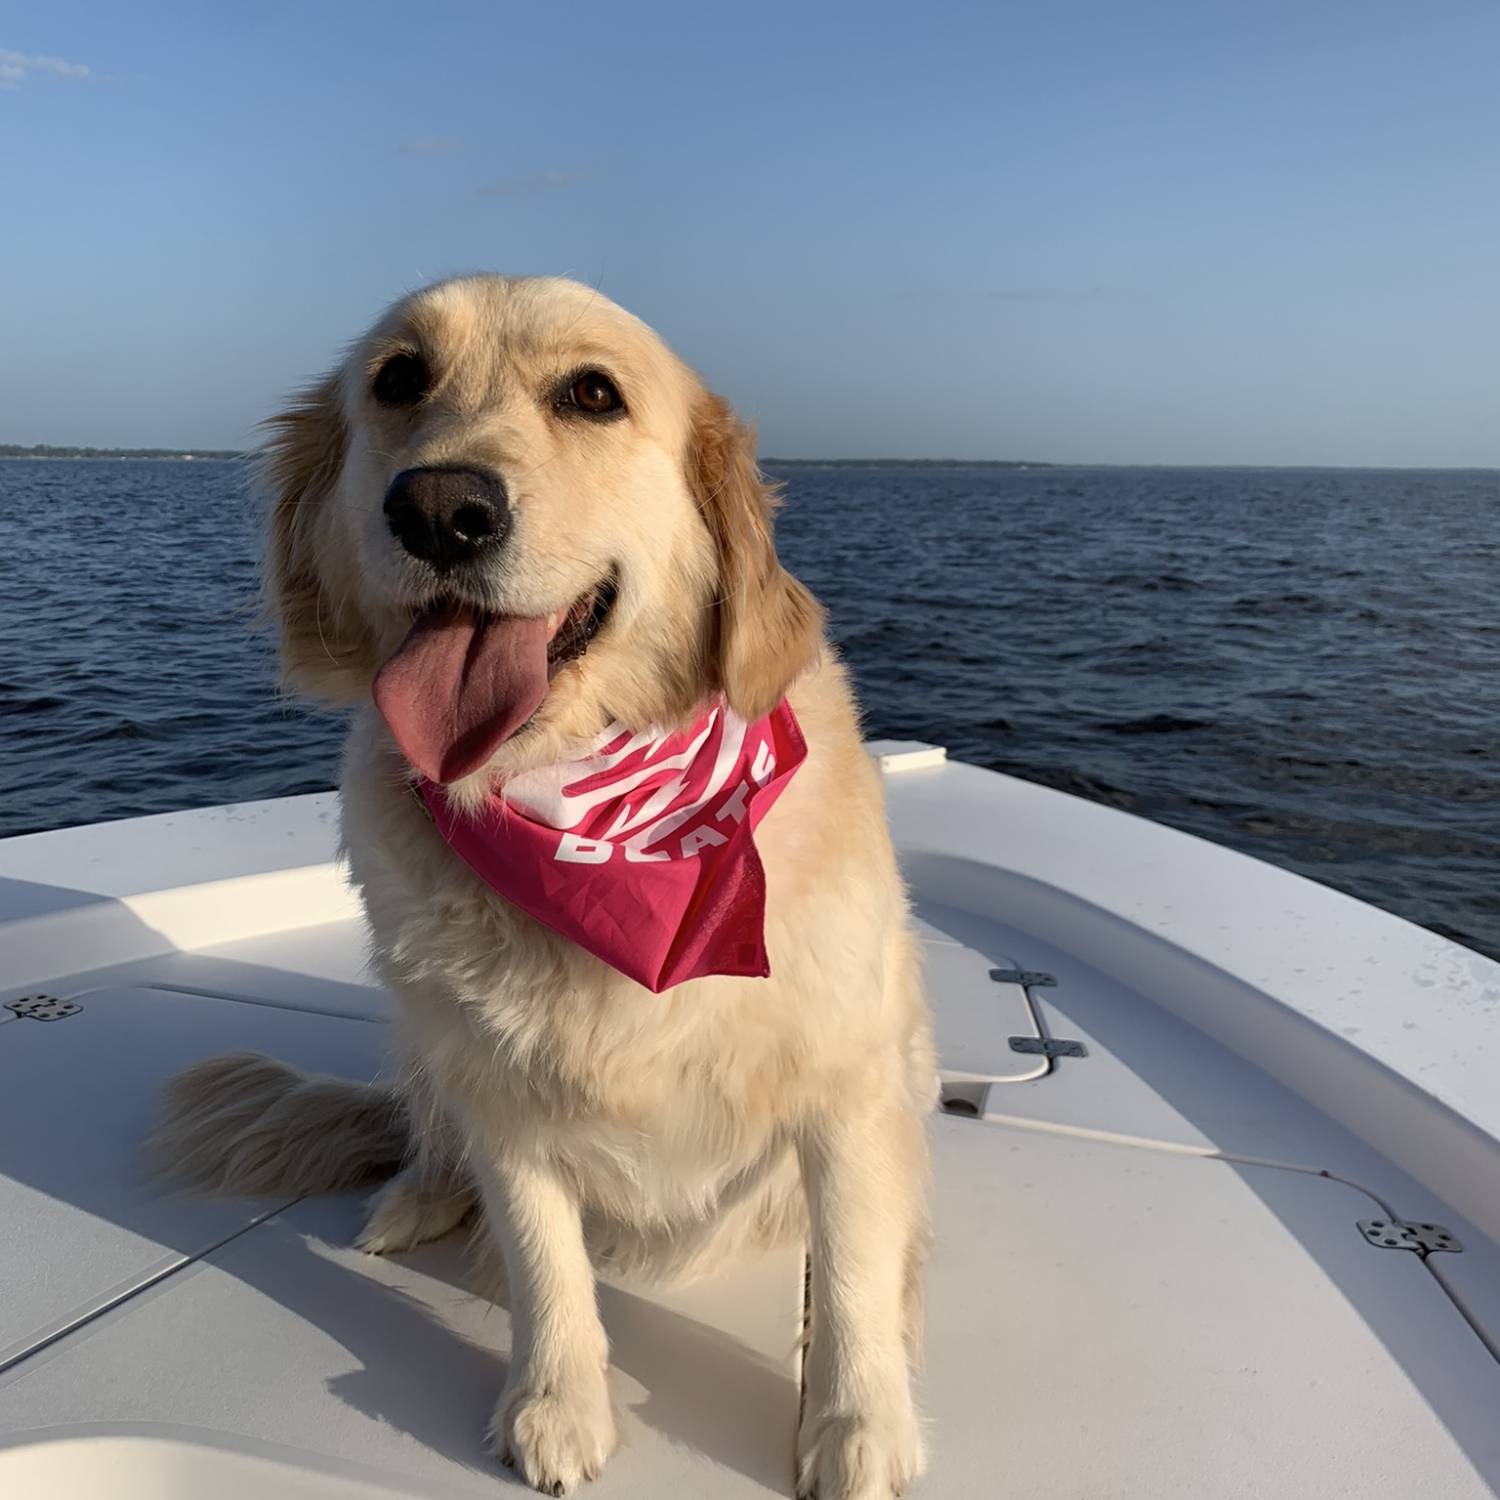 Title: Captain Annie - On board their Sportsman Masters 227 Bay Boat - Location: Jacksonville, Florida    St. Johns’s River. Participating in the Photo Contest #SportsmanSeptember